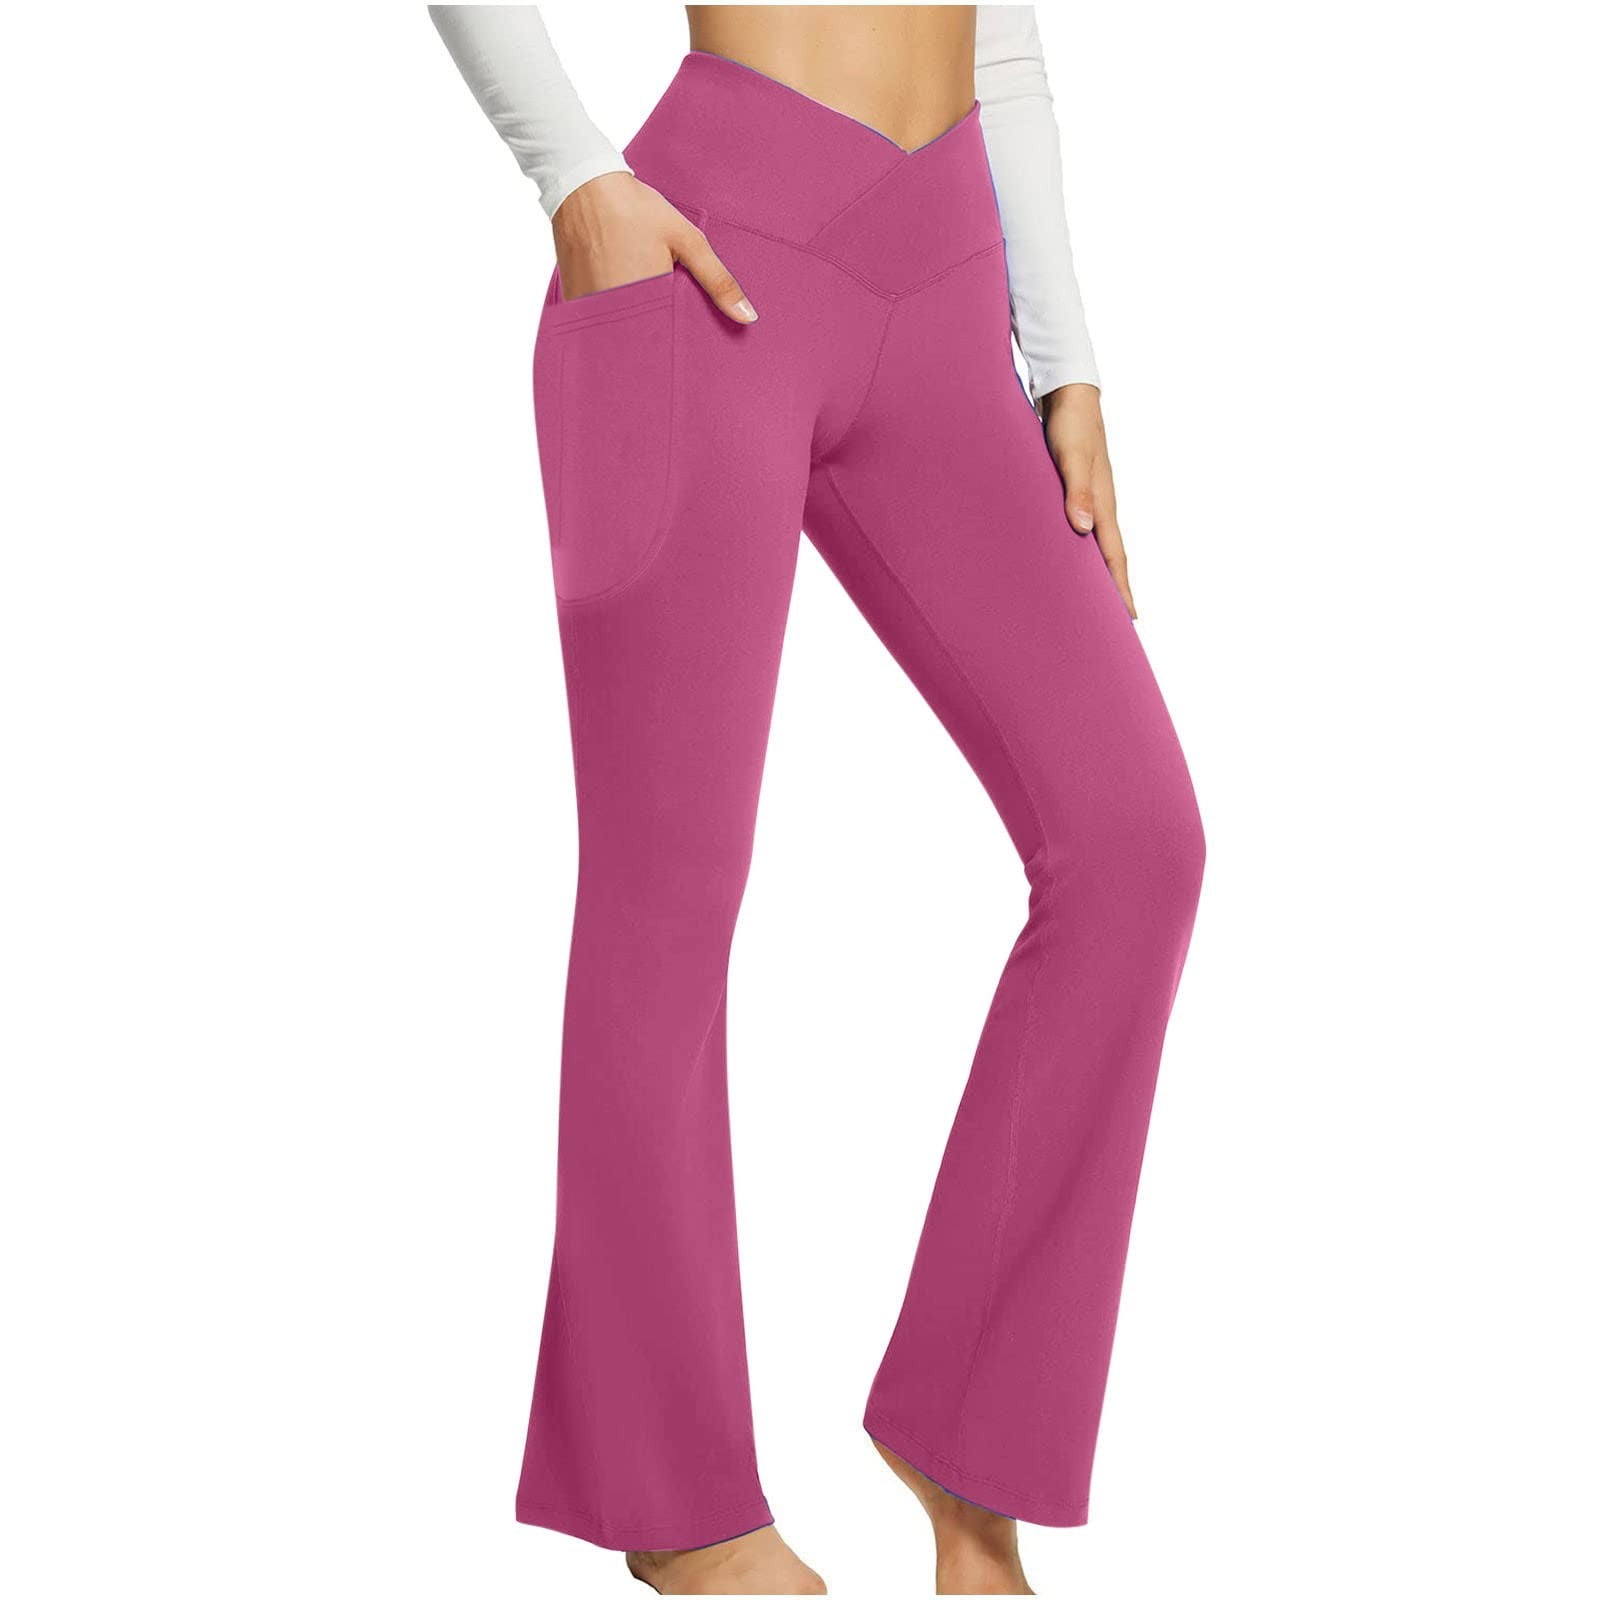 Hot Sales! Pants for Women, Yoga Pants with Pockets for Women